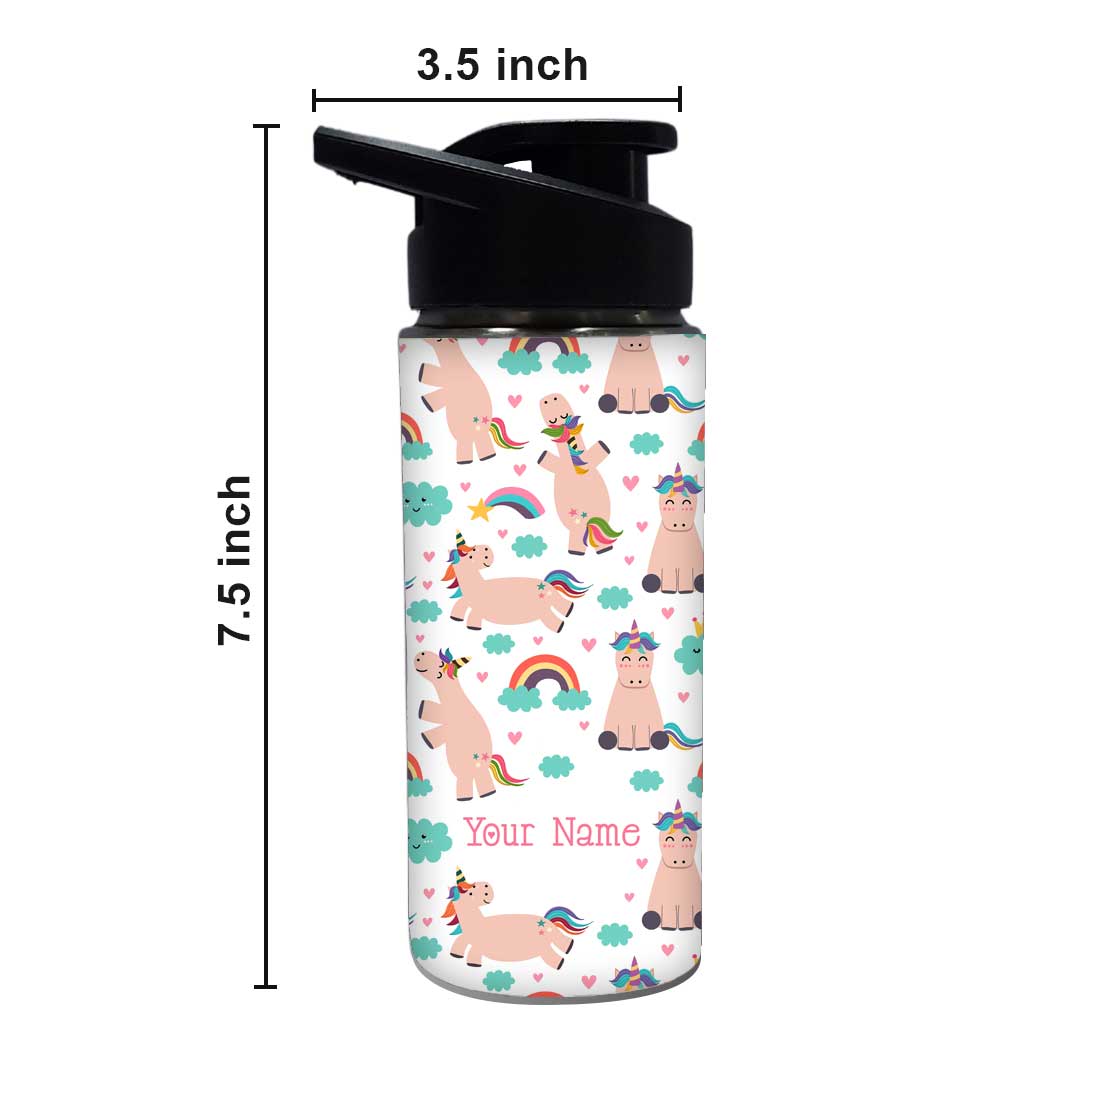 Customized Bottle with Name Sipper Bottles for Kids-Unicorn Nutcase